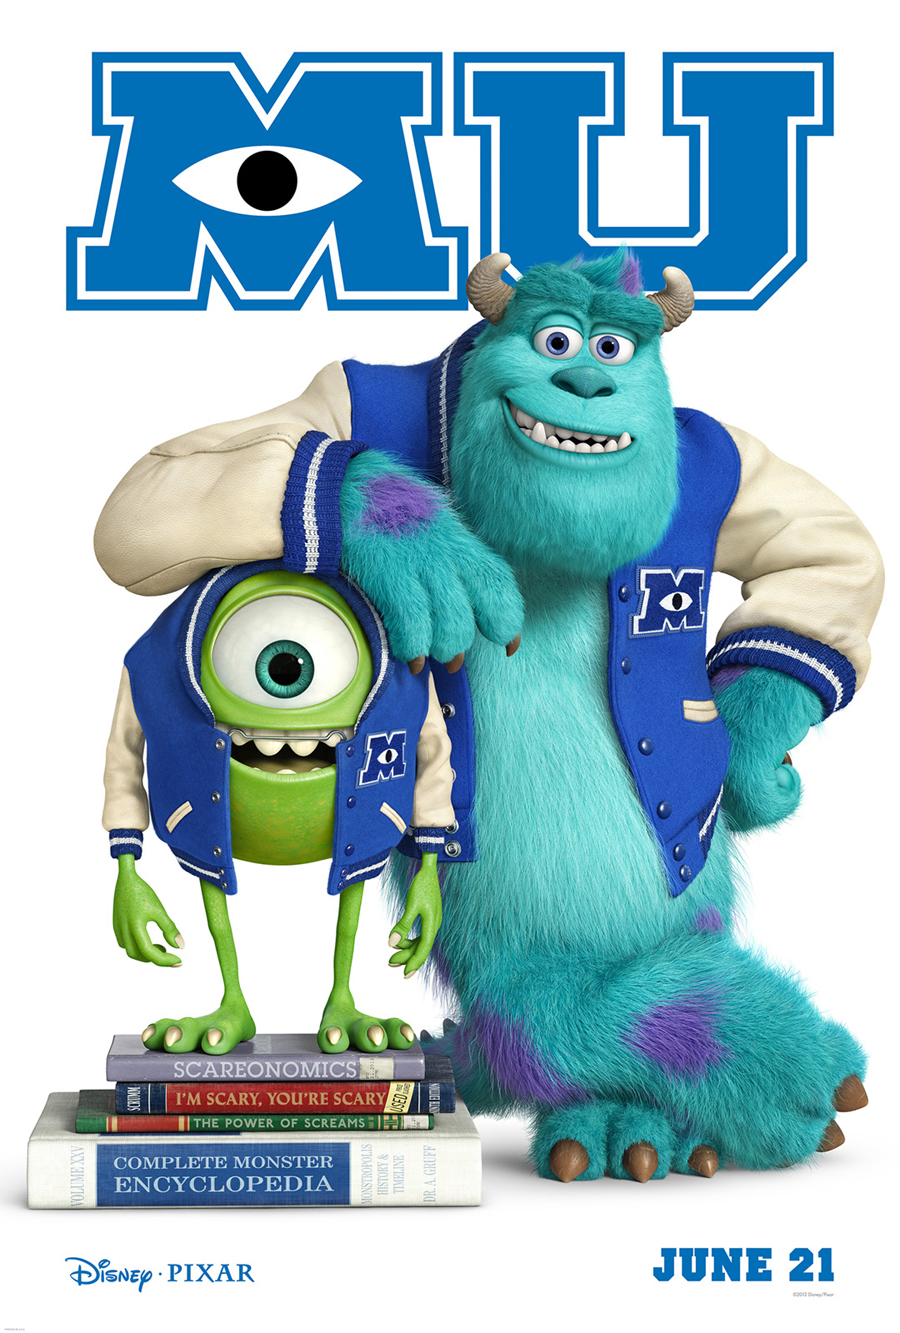 How Did Monsters University and World War Z Do This Weekend?